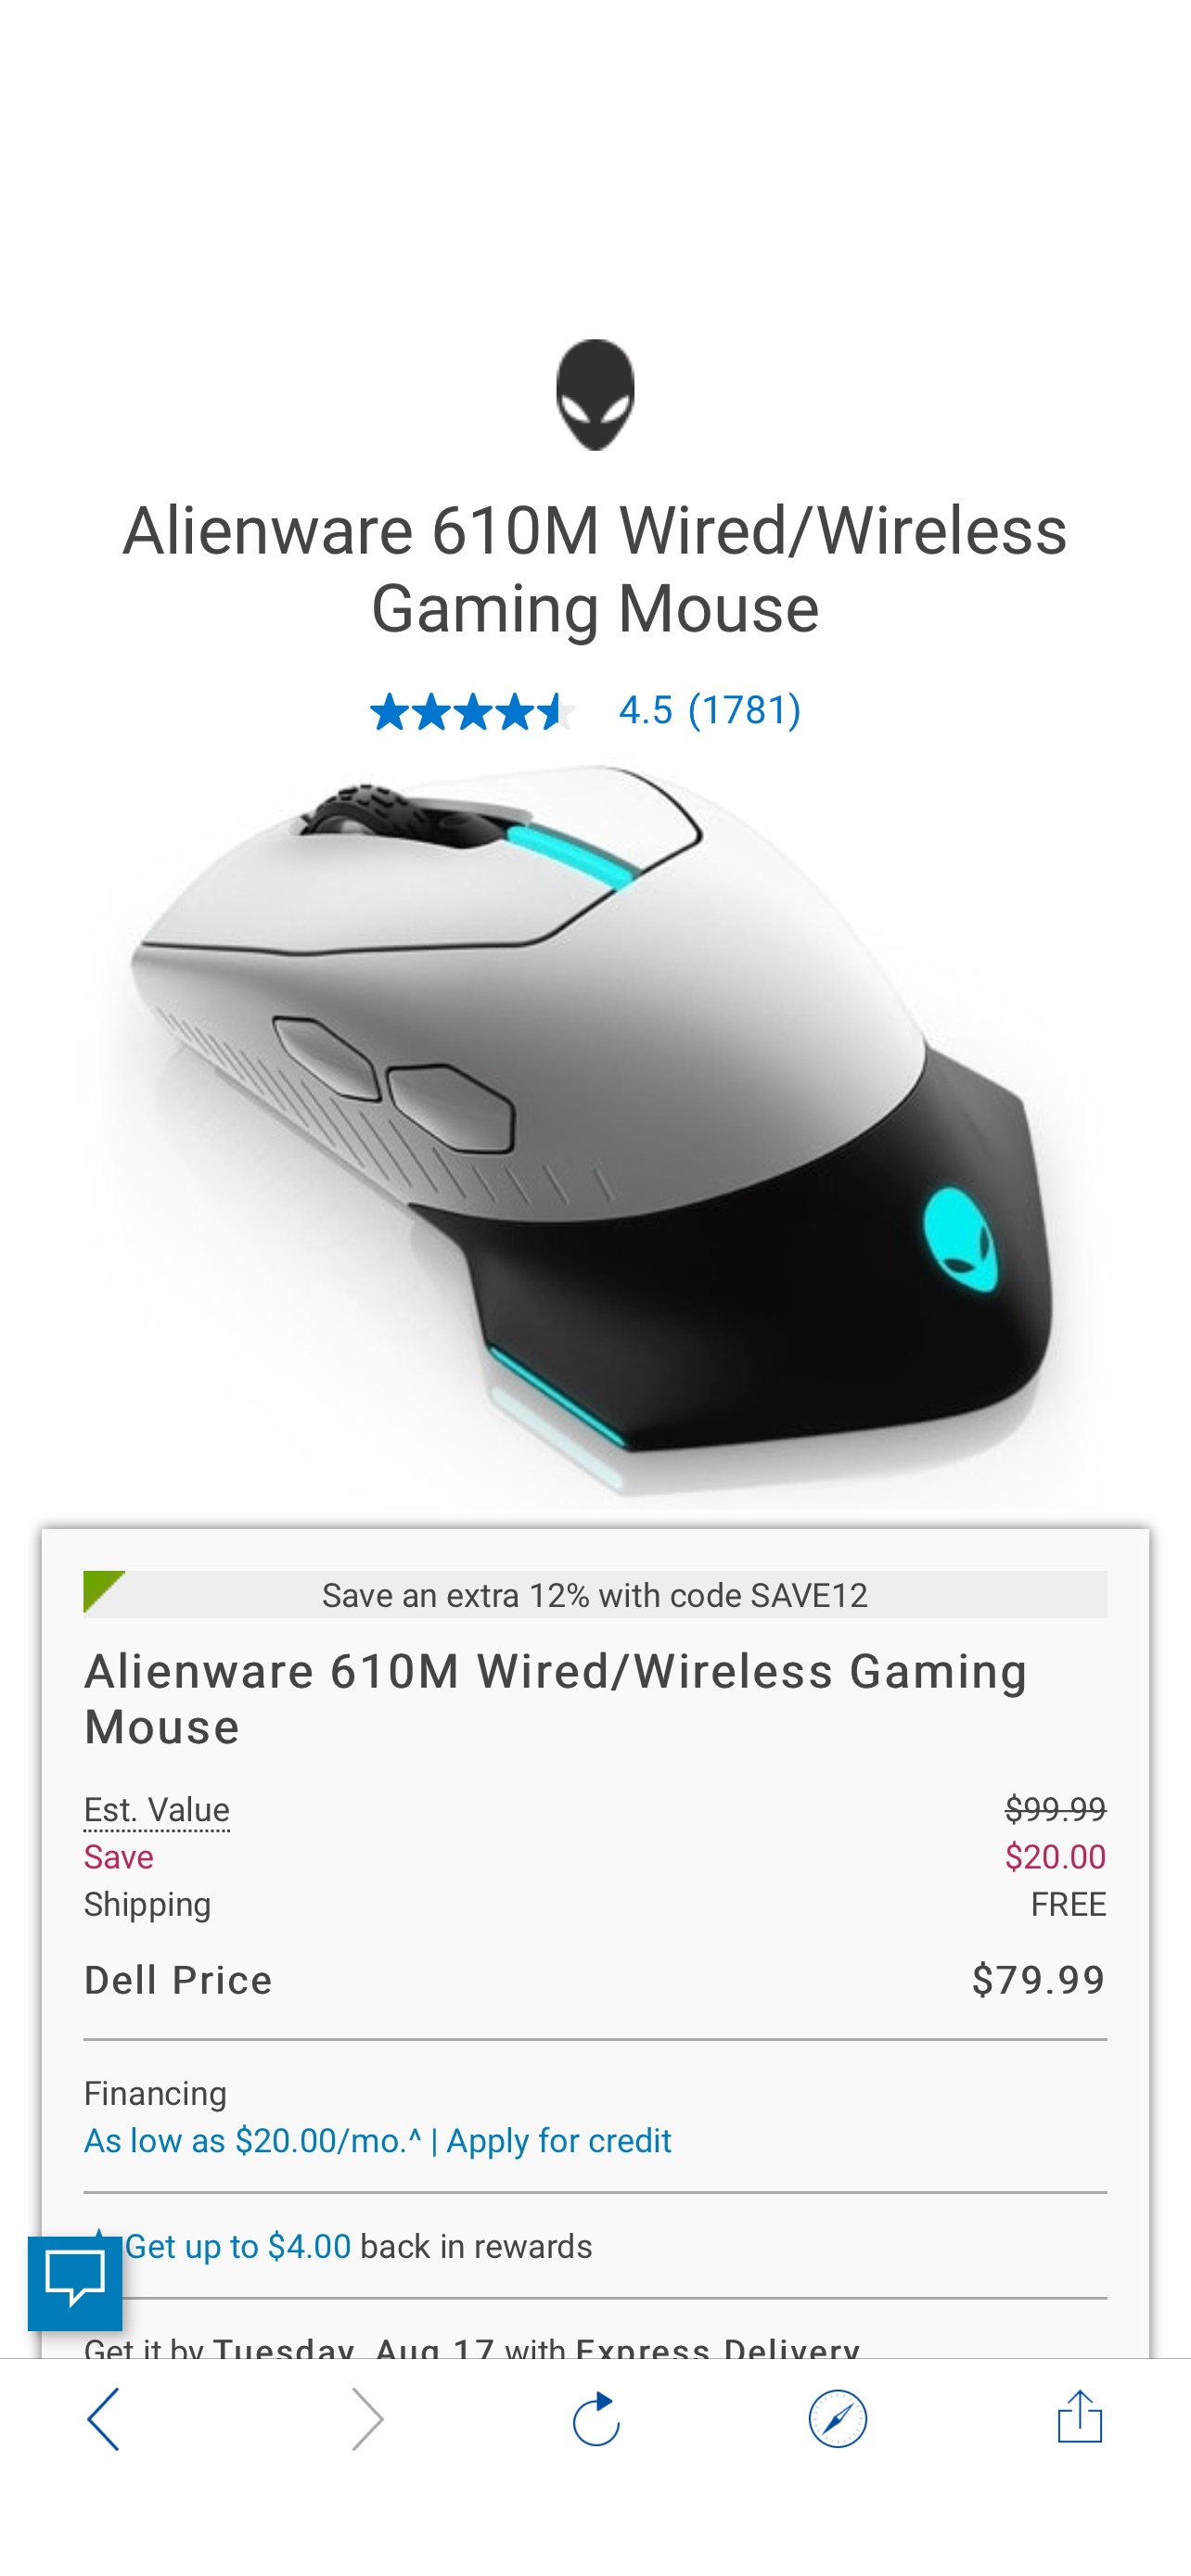 Alienware 610M Wired/Wireless Gaming Mouse鼠标